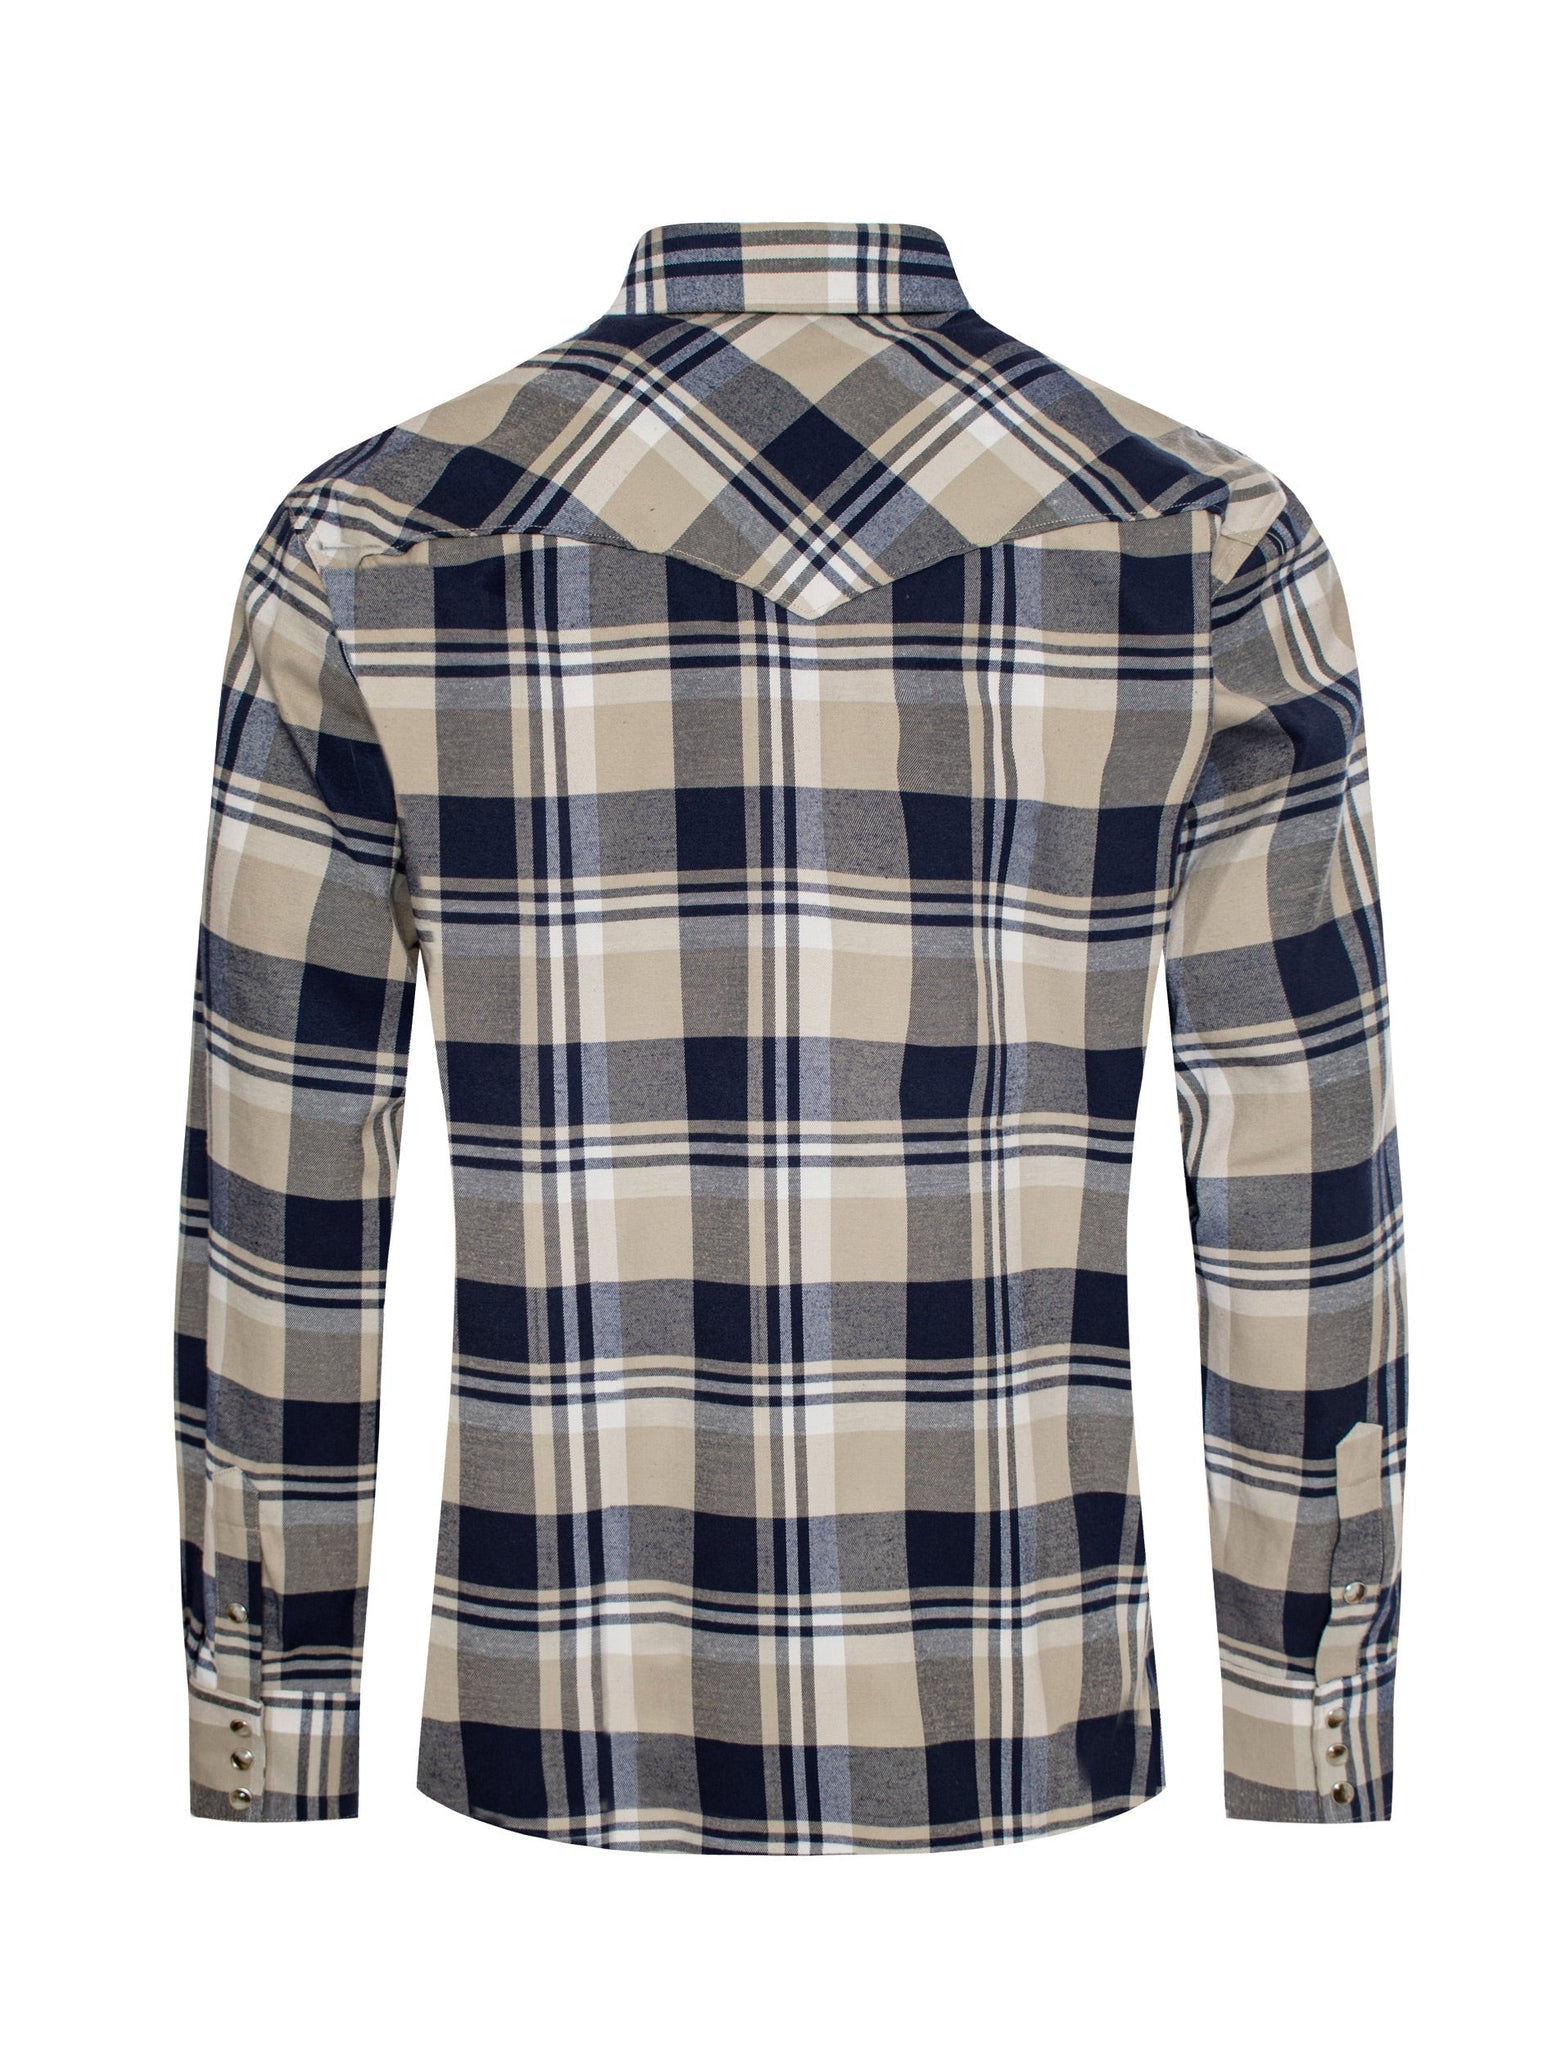 Men's Western Flannel Shirts With Snap Buttons -FLS300-307